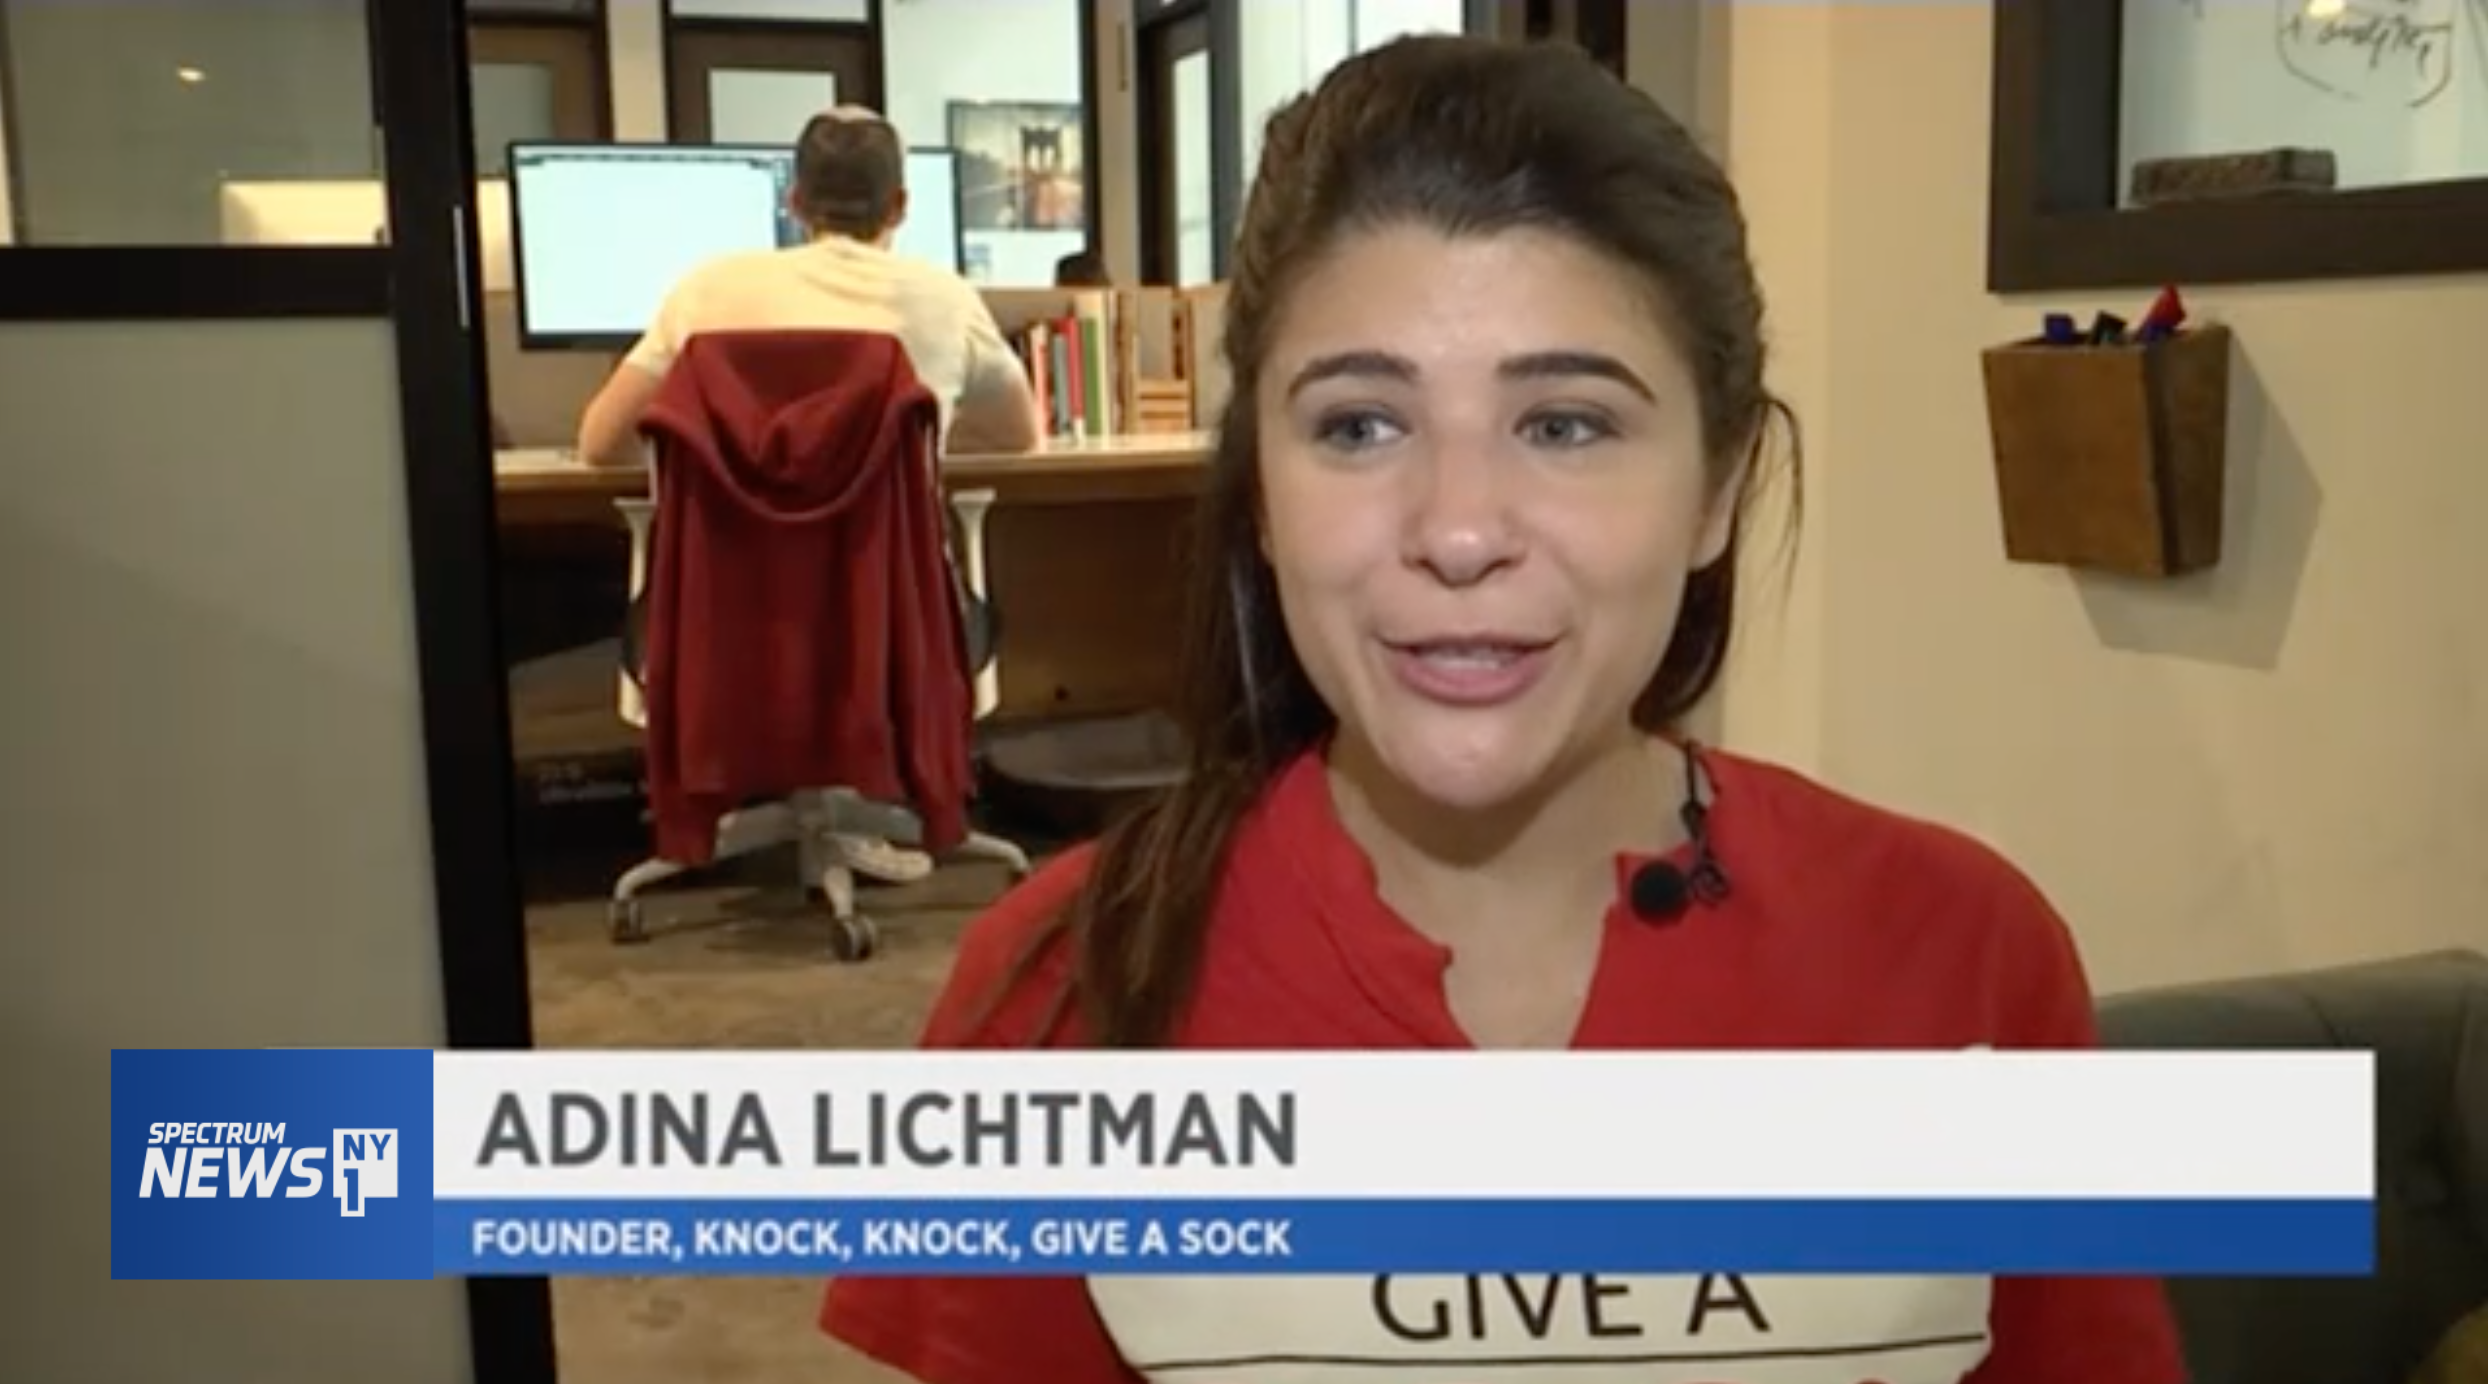 Spectrum News: For This Activist, All it Takes is a 'Knock' to Donate Socks to Homeless New Yorkers